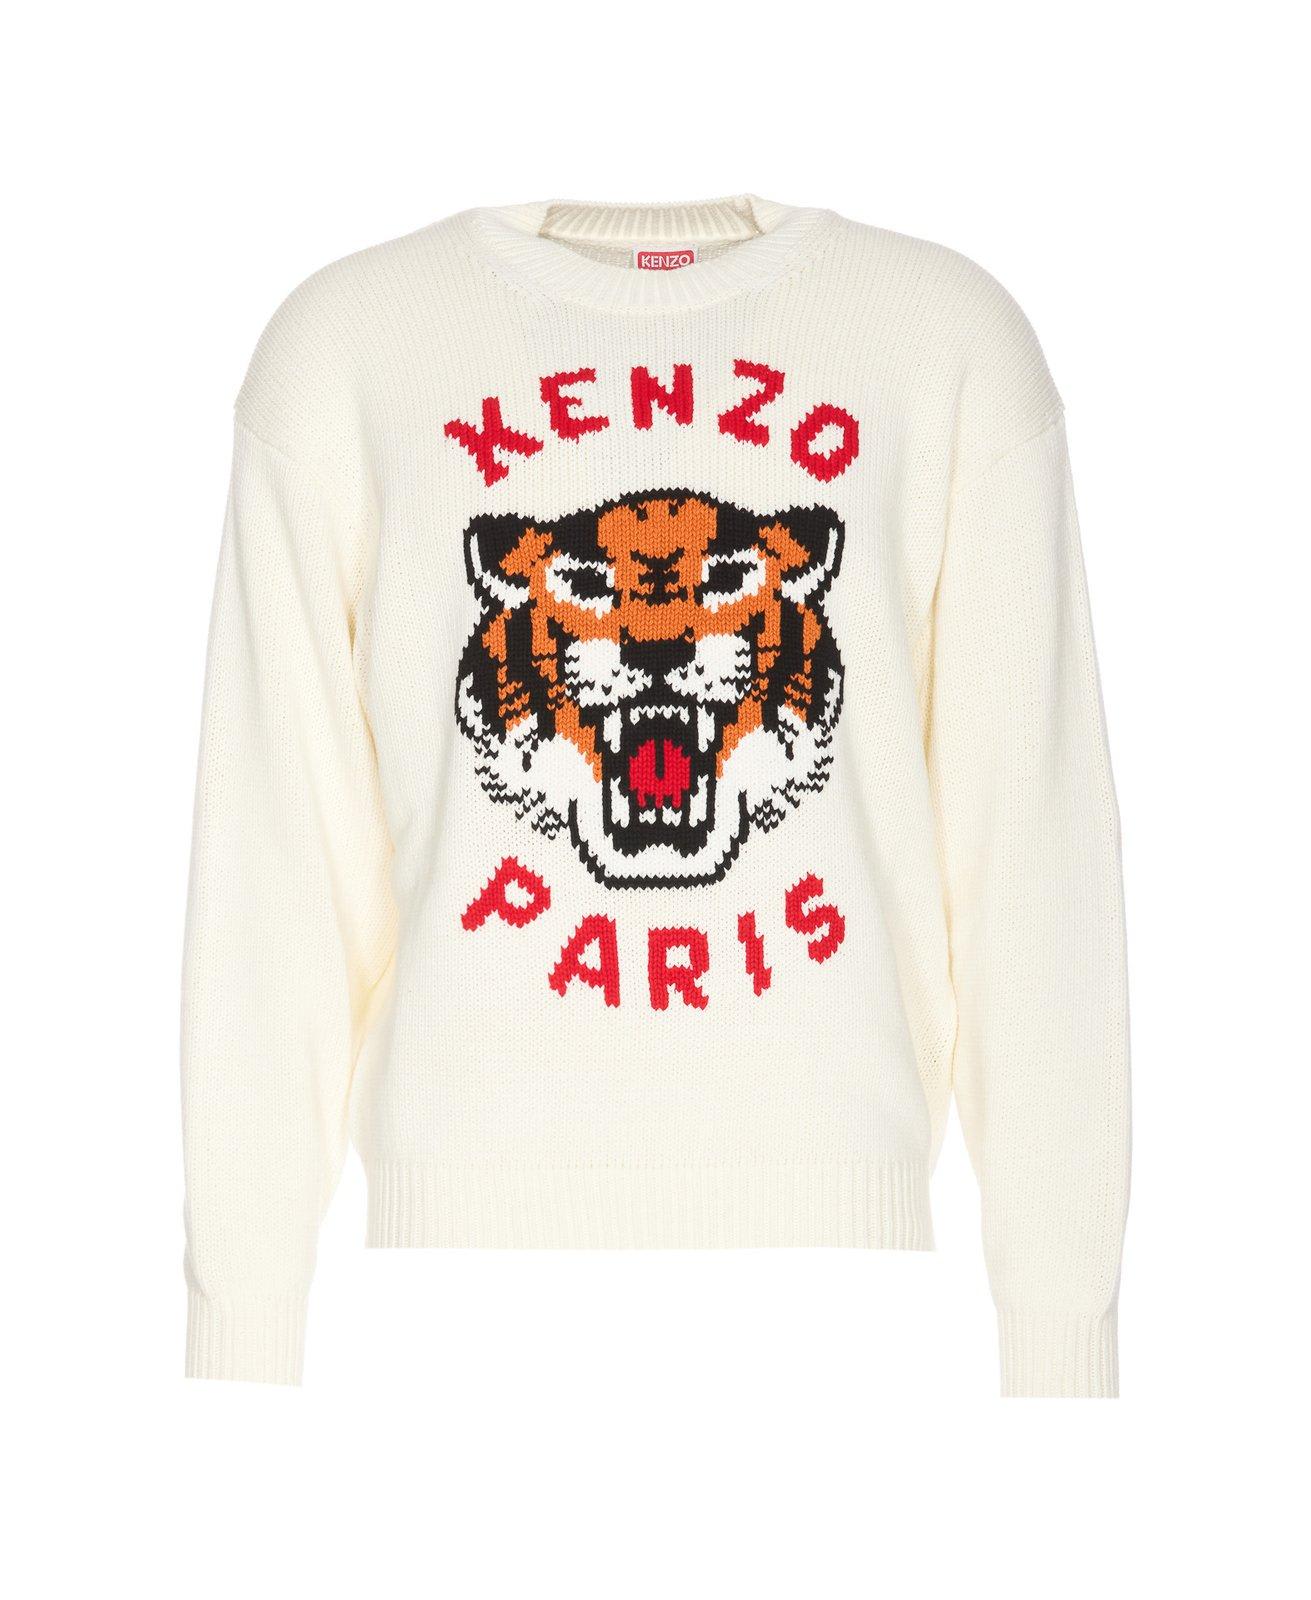 KENZO LUCKY TIGER KNITTED JUMPER